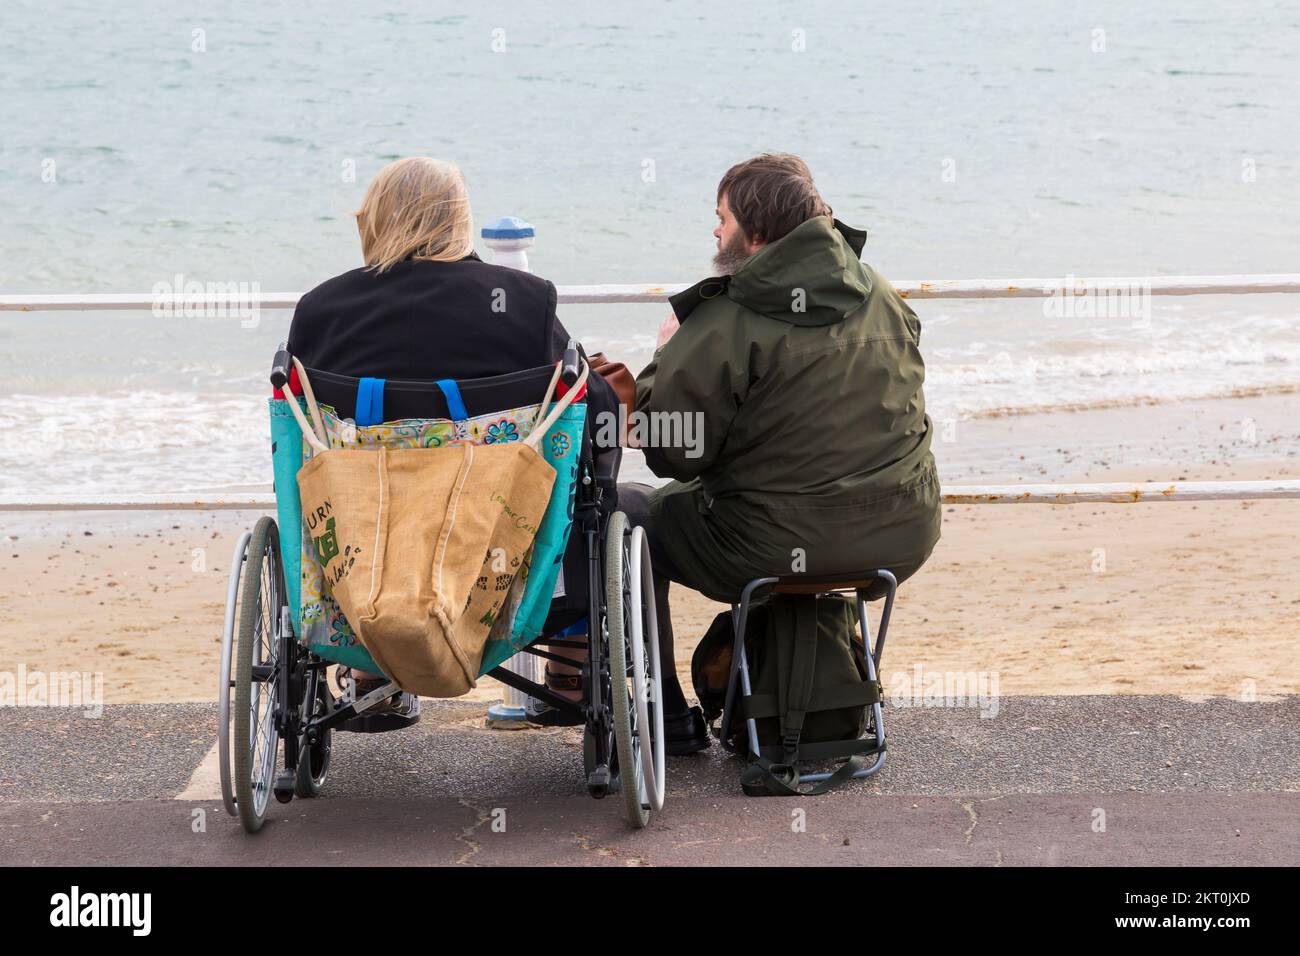 Couple sitting on promenade esplanade, woman in wheelchair, man in fold up seat, at Weymouth, Dorset UK in October Stock Photo